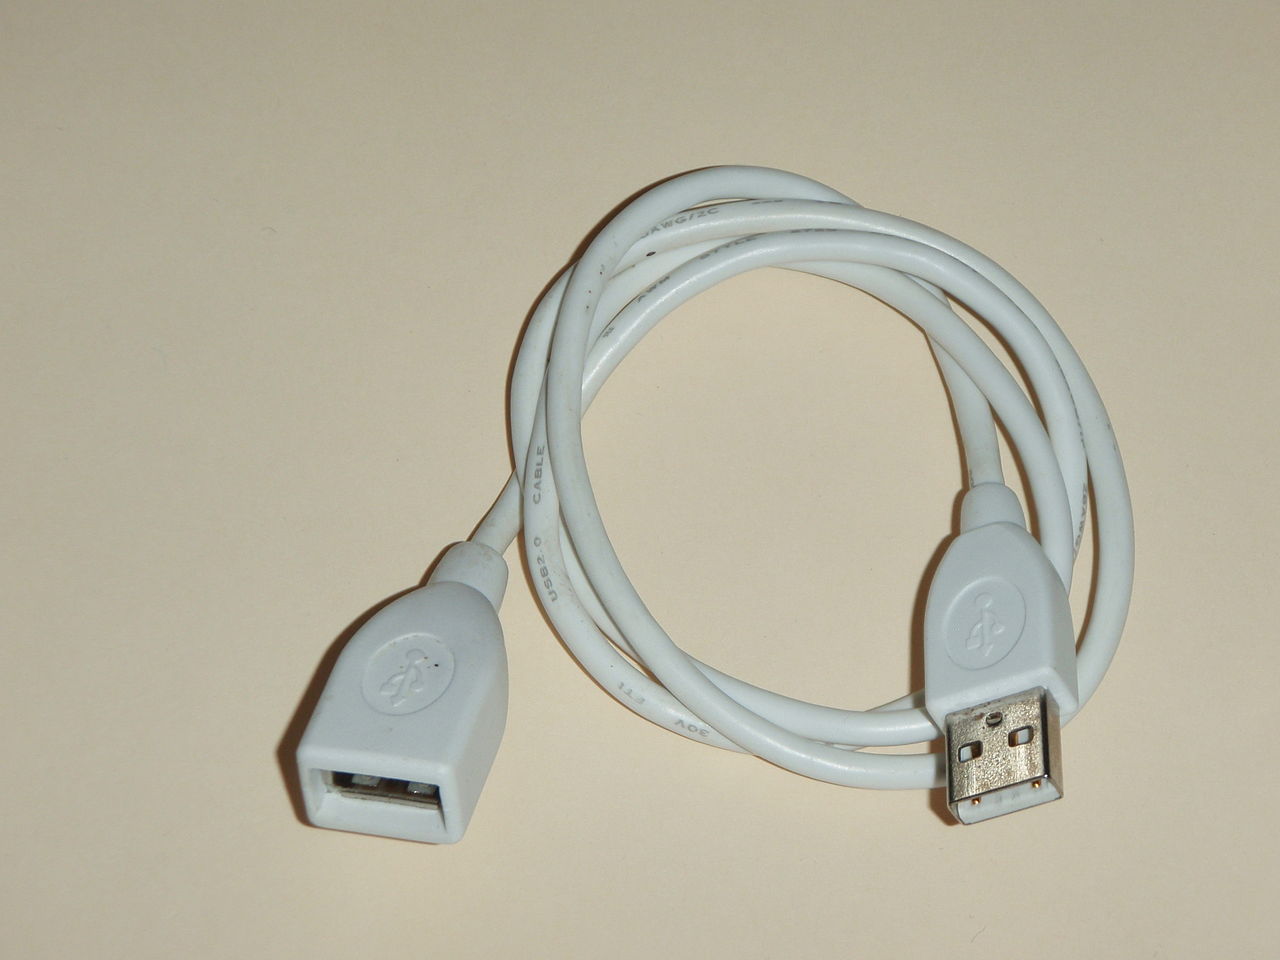 A grey cable with a USB plug at one end, and a socket at the other.